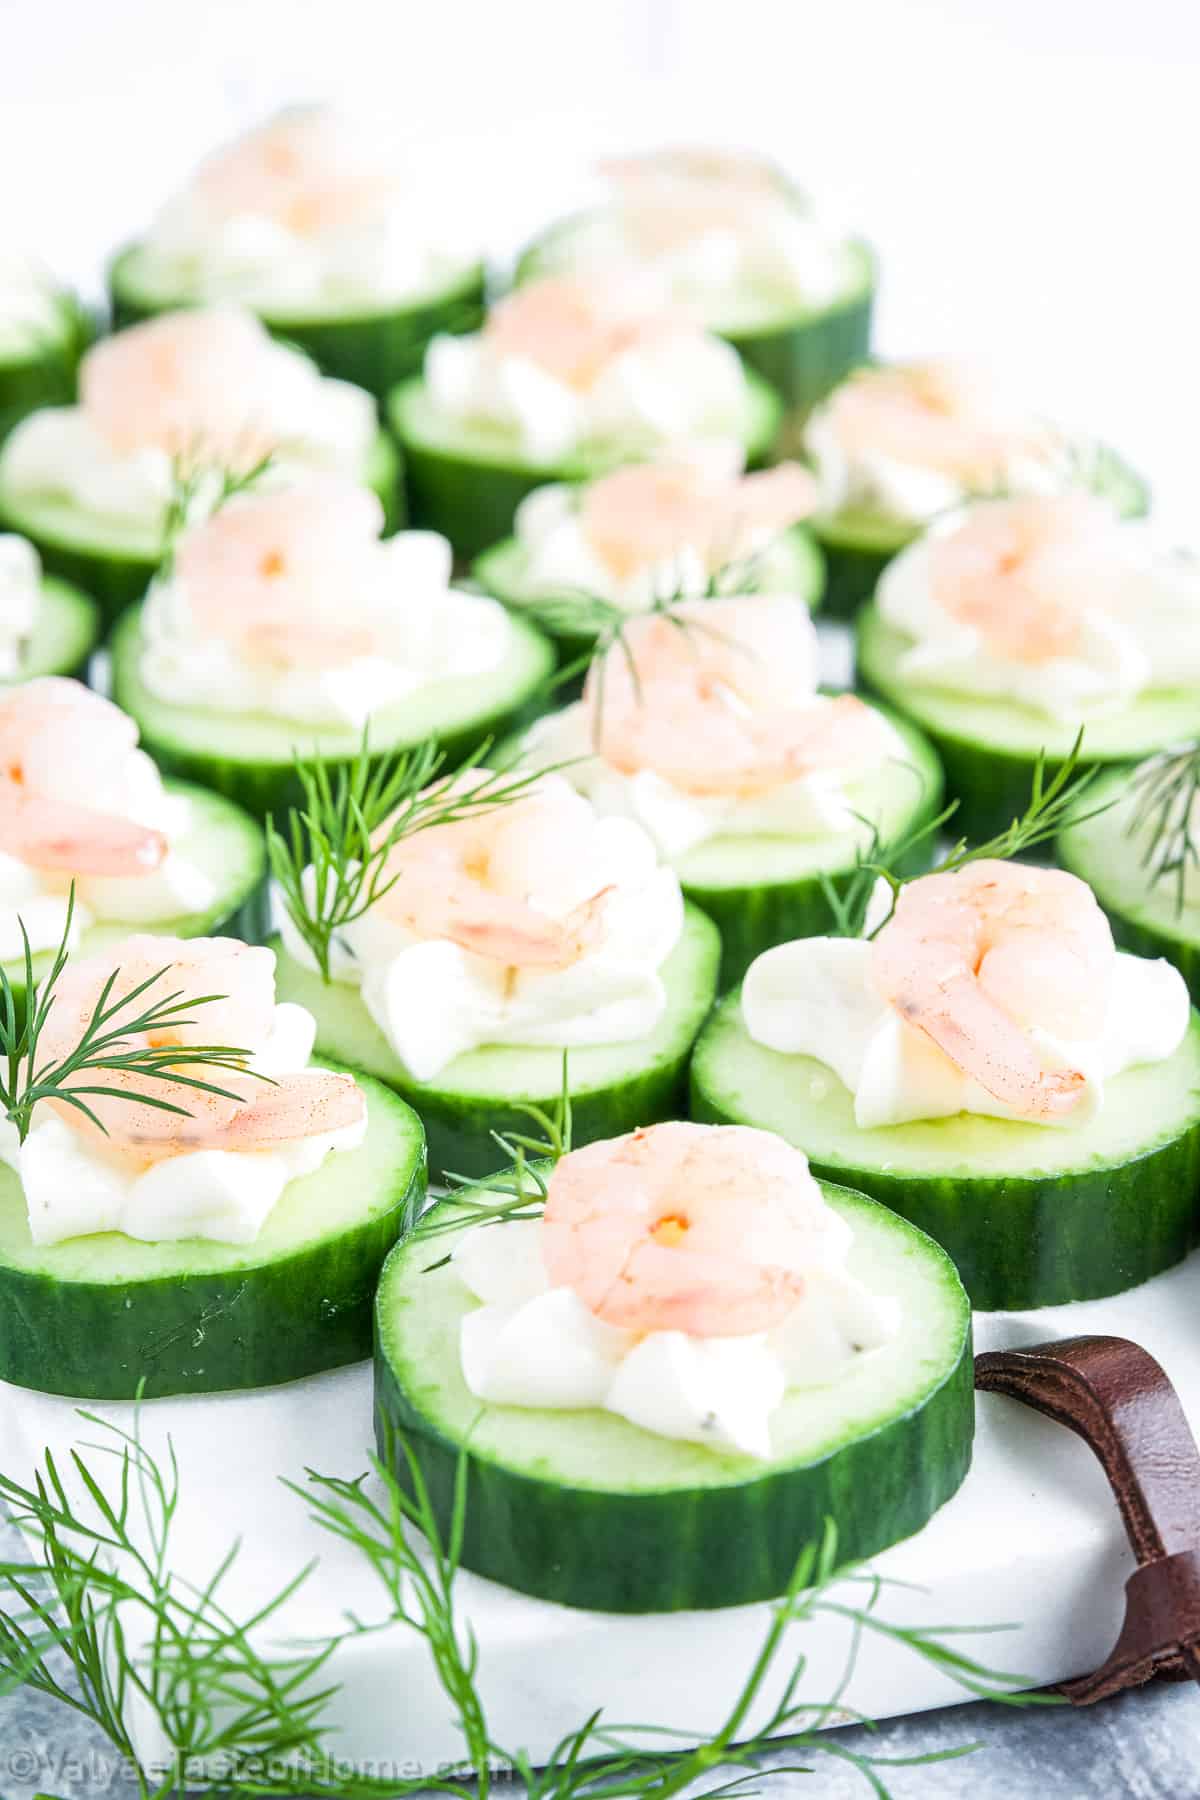 The star of our recipe, English cucumbers, are used as the base for our shrimp cucumber bites.